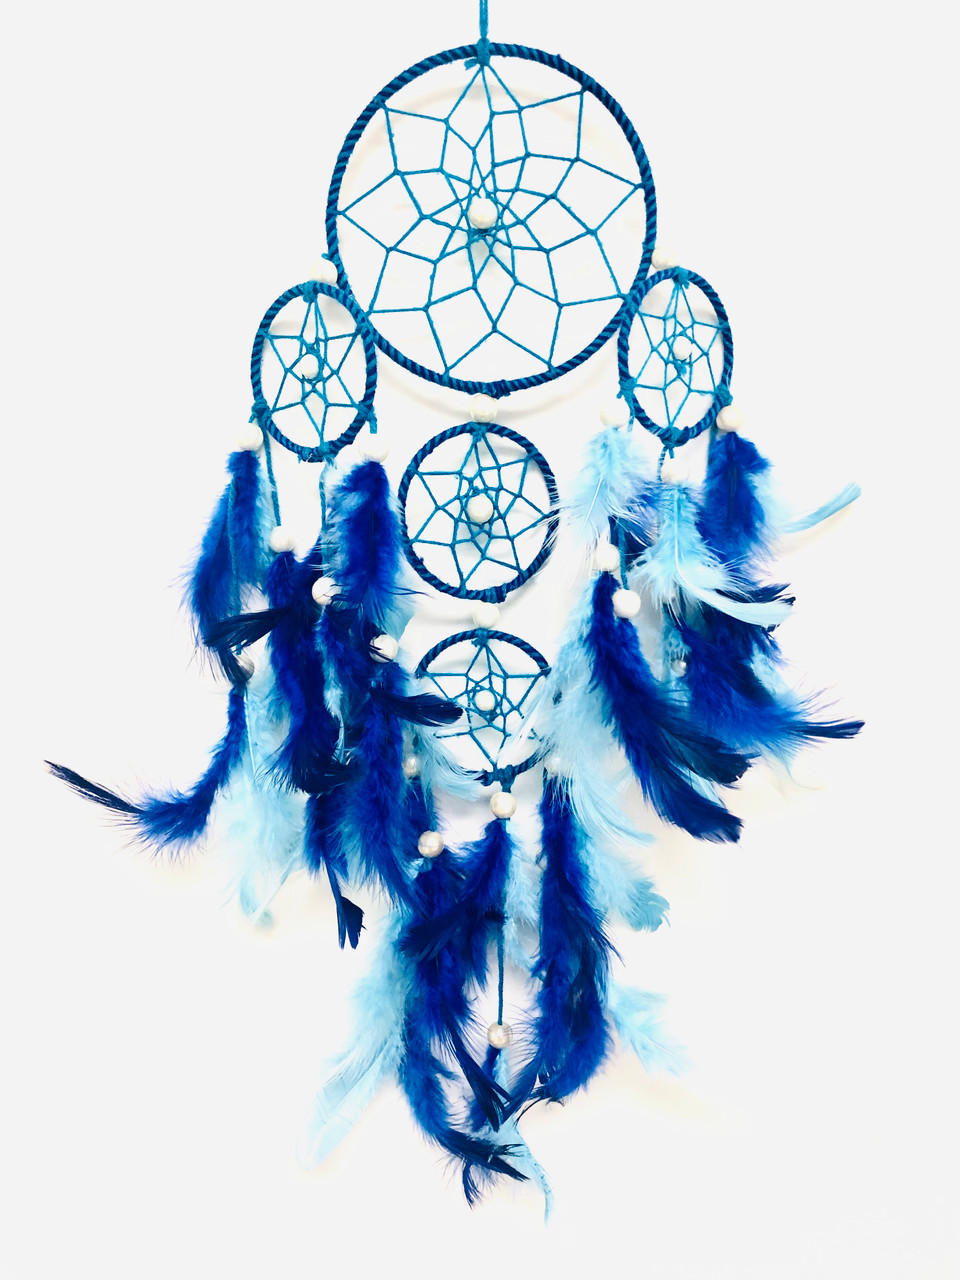 Dream Catcher Light blue and Dark blue feathers w/ pearl like beads